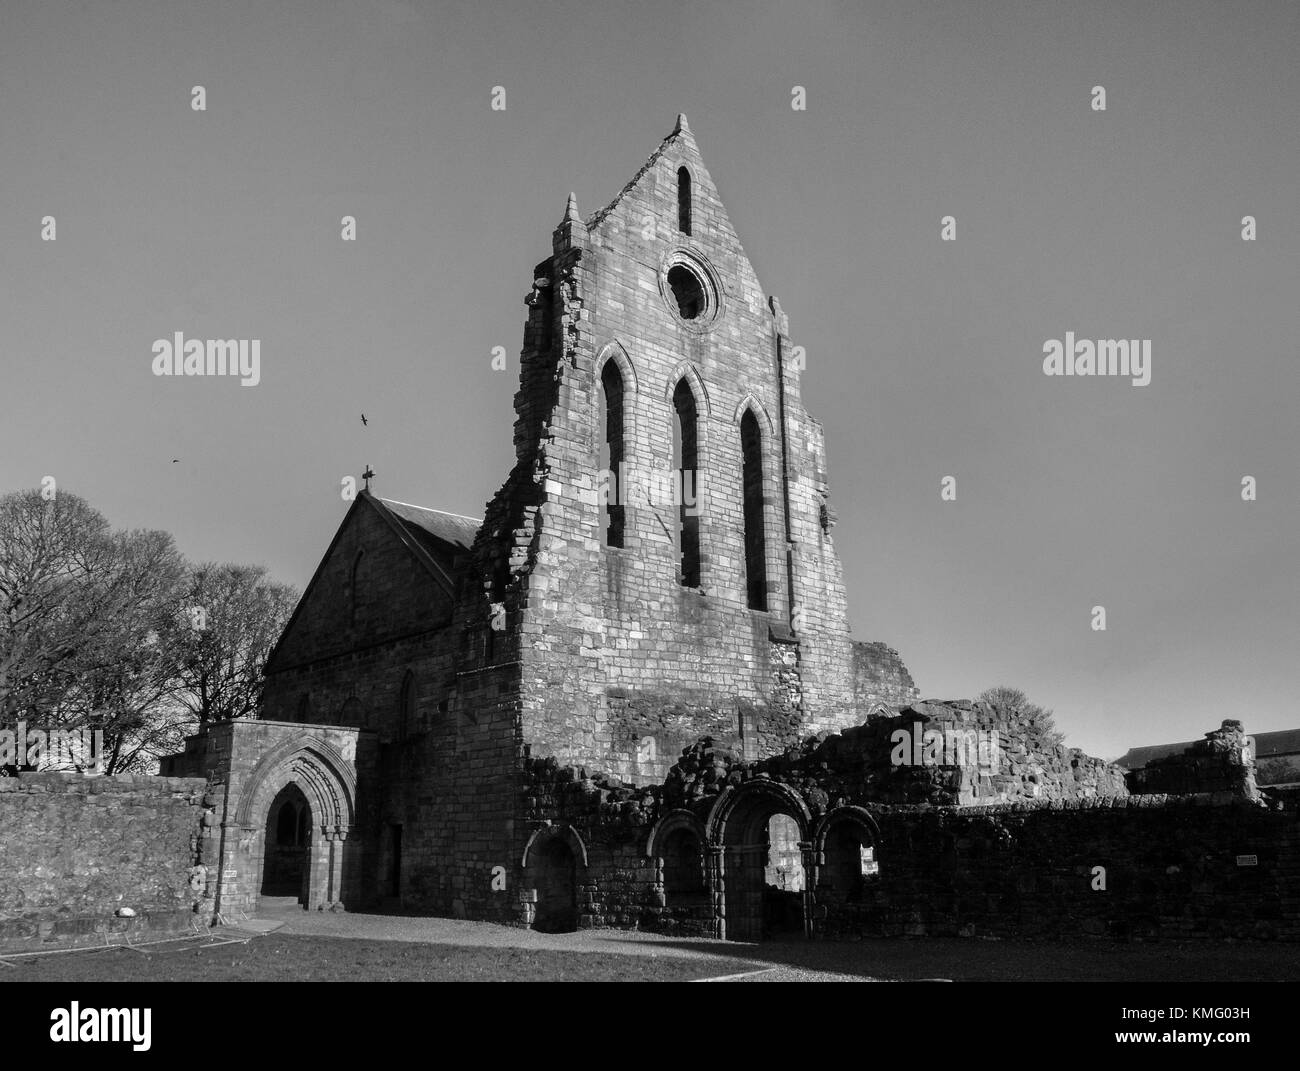 KILWINNING, SCOTLAND - NOVEMBER 12 2017: A black and white photograph of the ruins of Kilwinning Abbey which was home to the Tironensian monks. Stock Photo